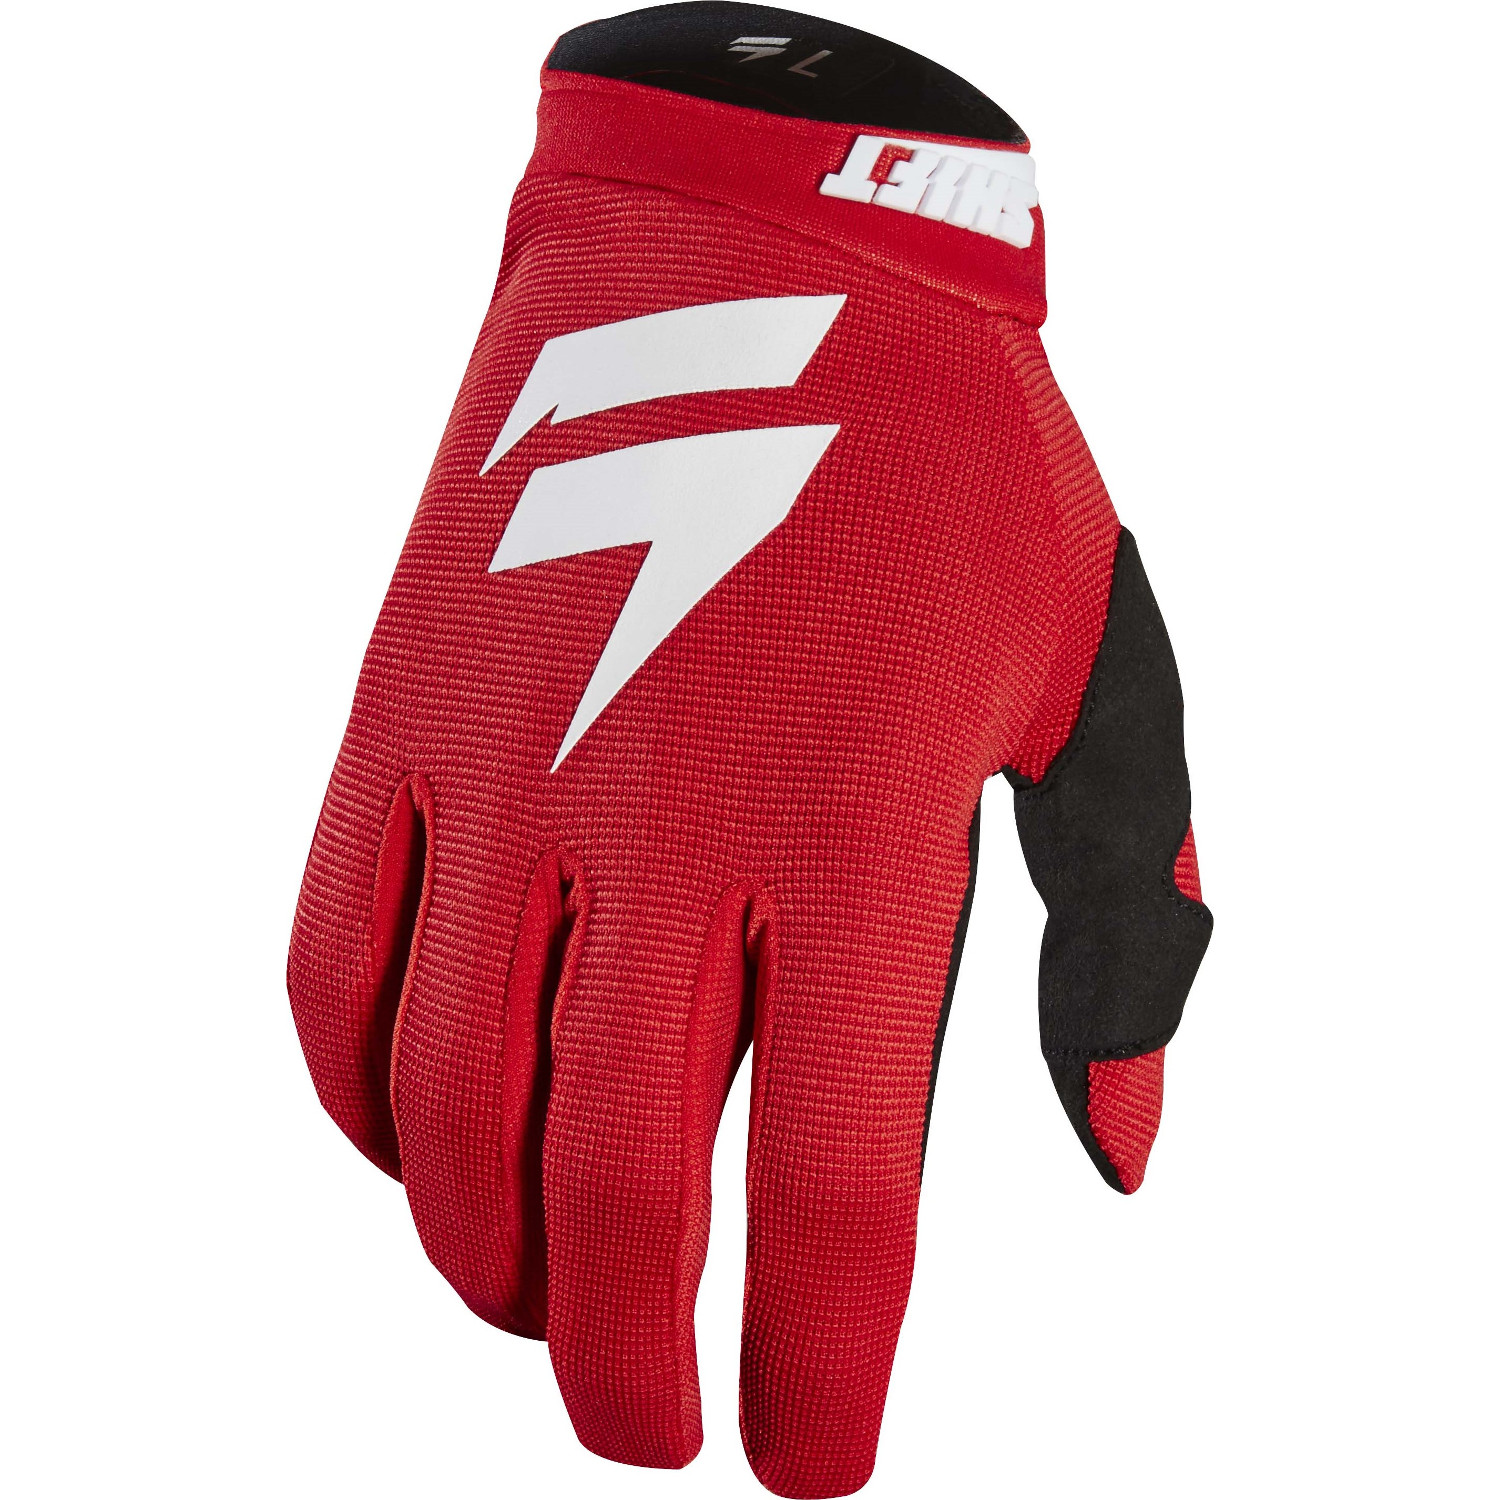 Shift Gloves Whit3 Label Air Red